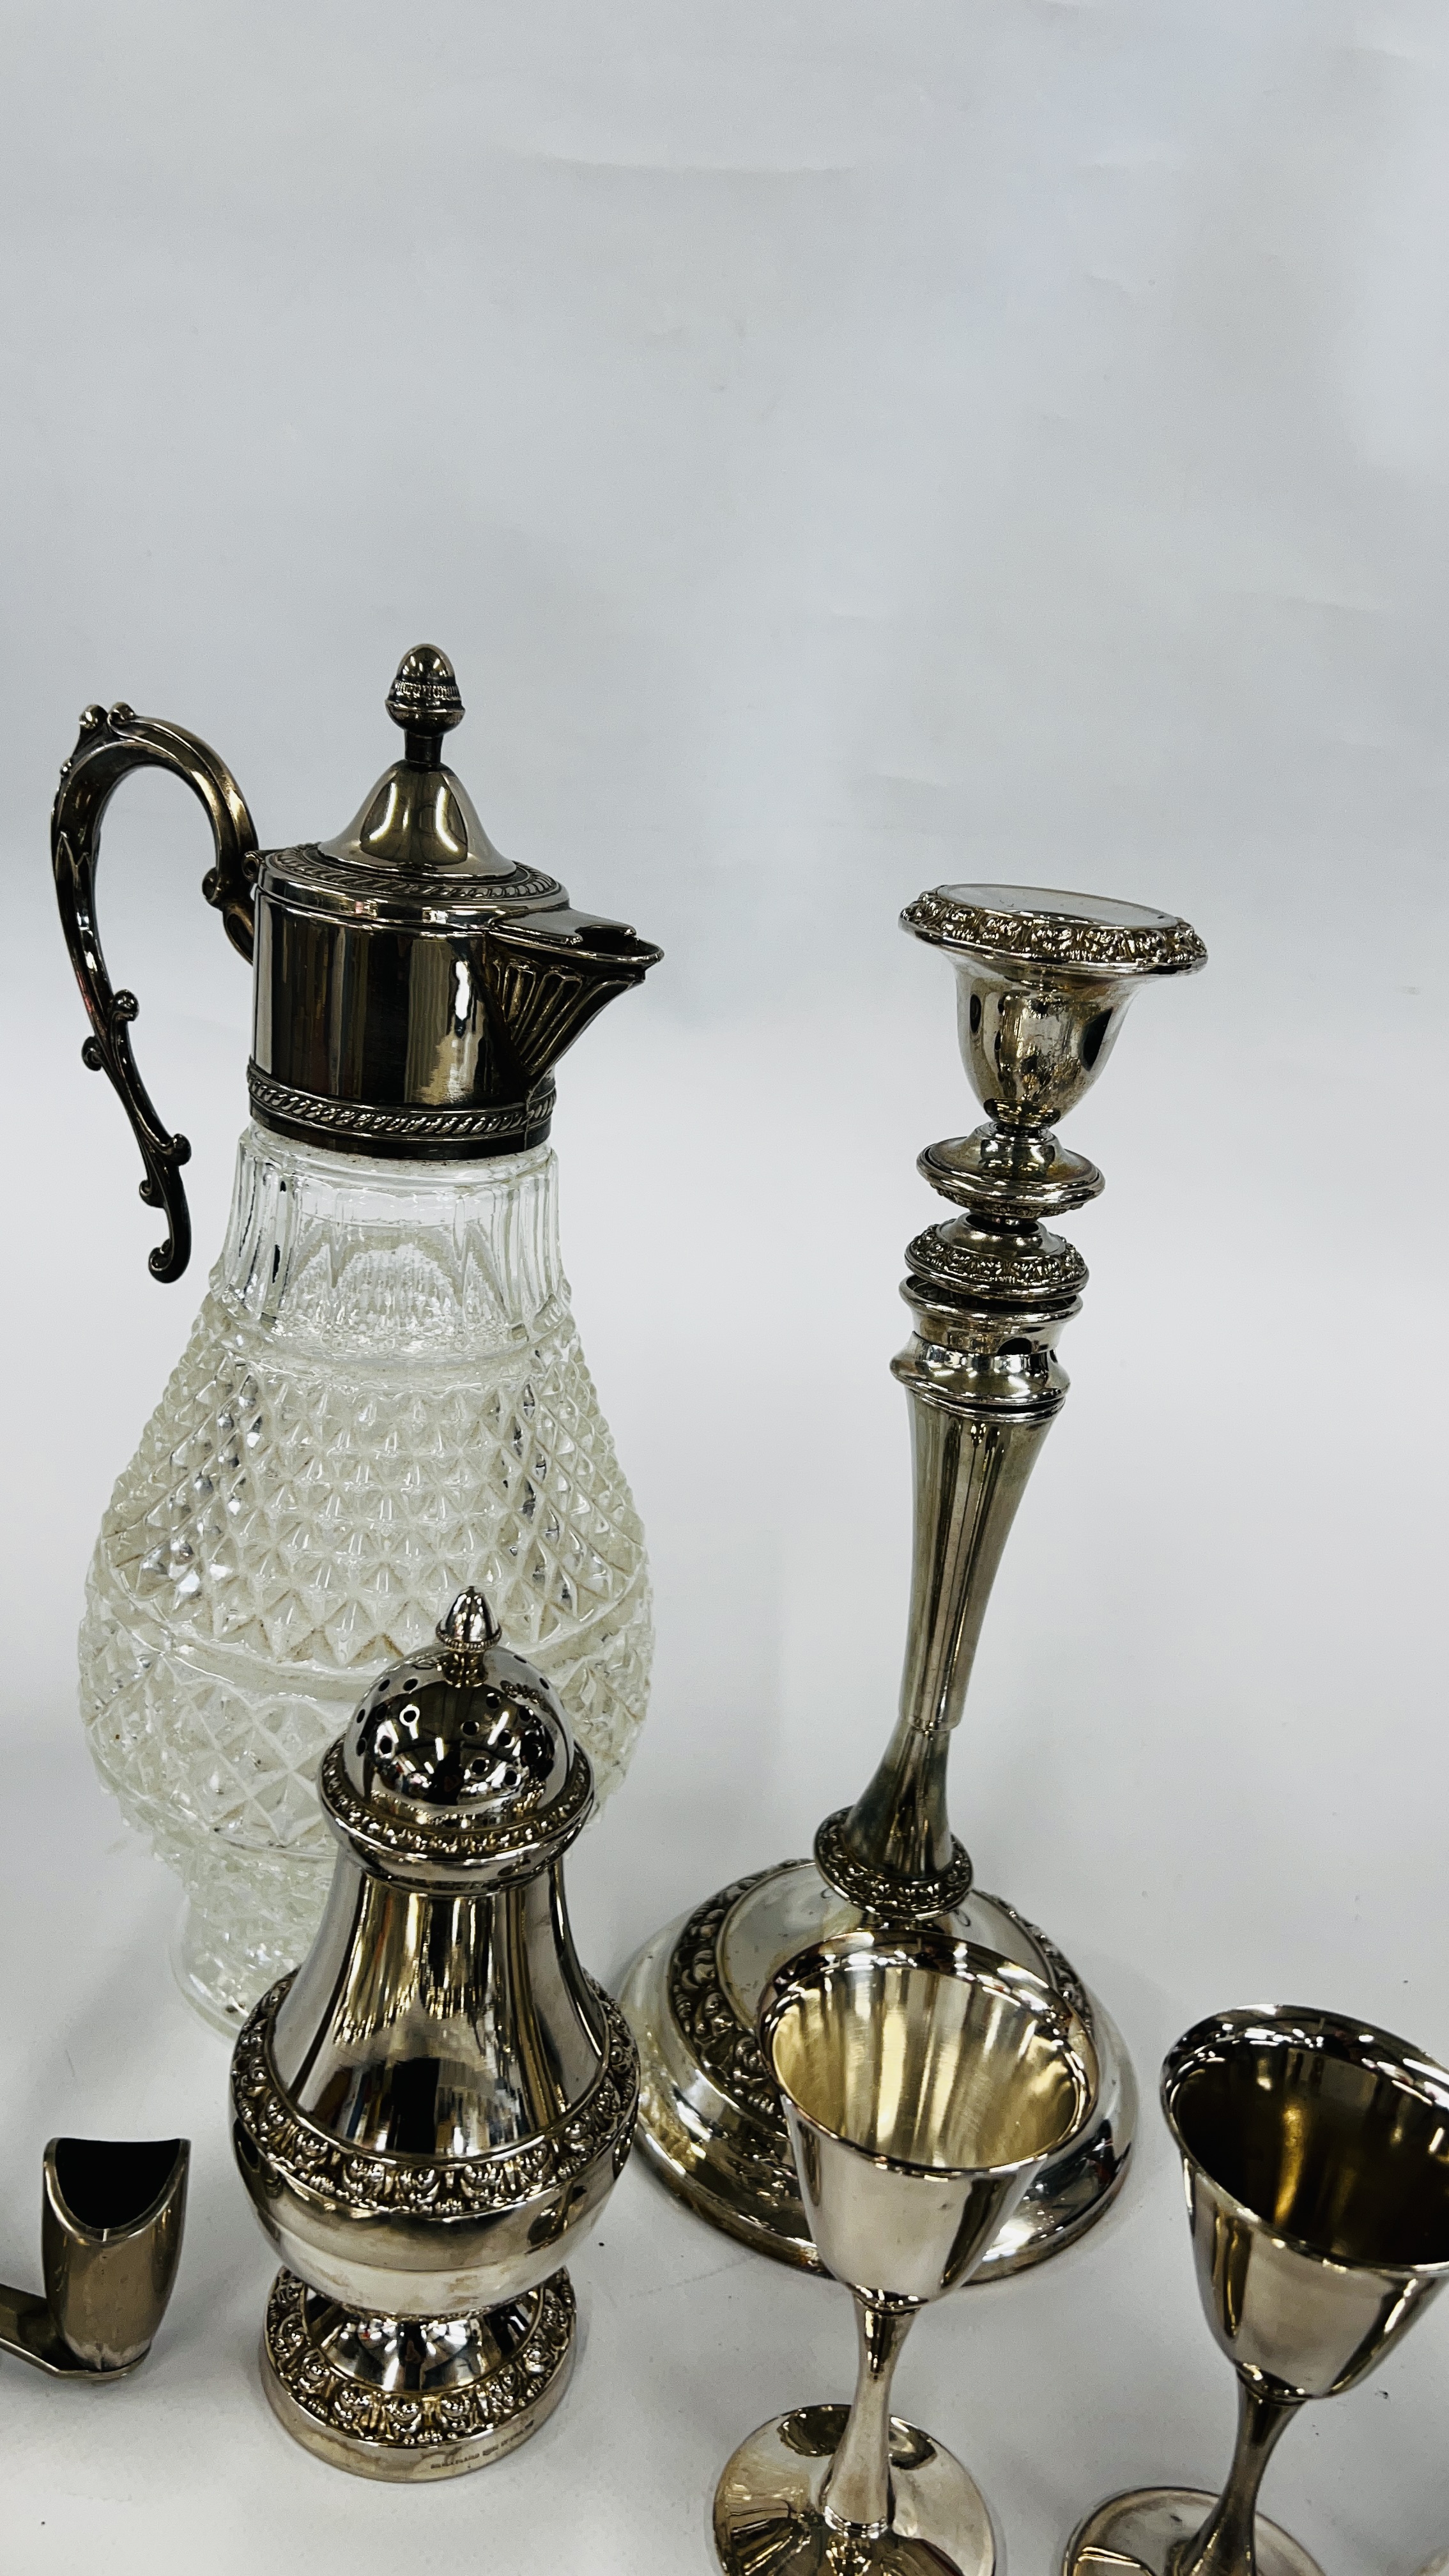 COLLECTION OF PLATED WARE INCLUDING CLARET JUG, SUGAR SIFTER TRAYS, CANDELABRA ETC. - Image 5 of 7